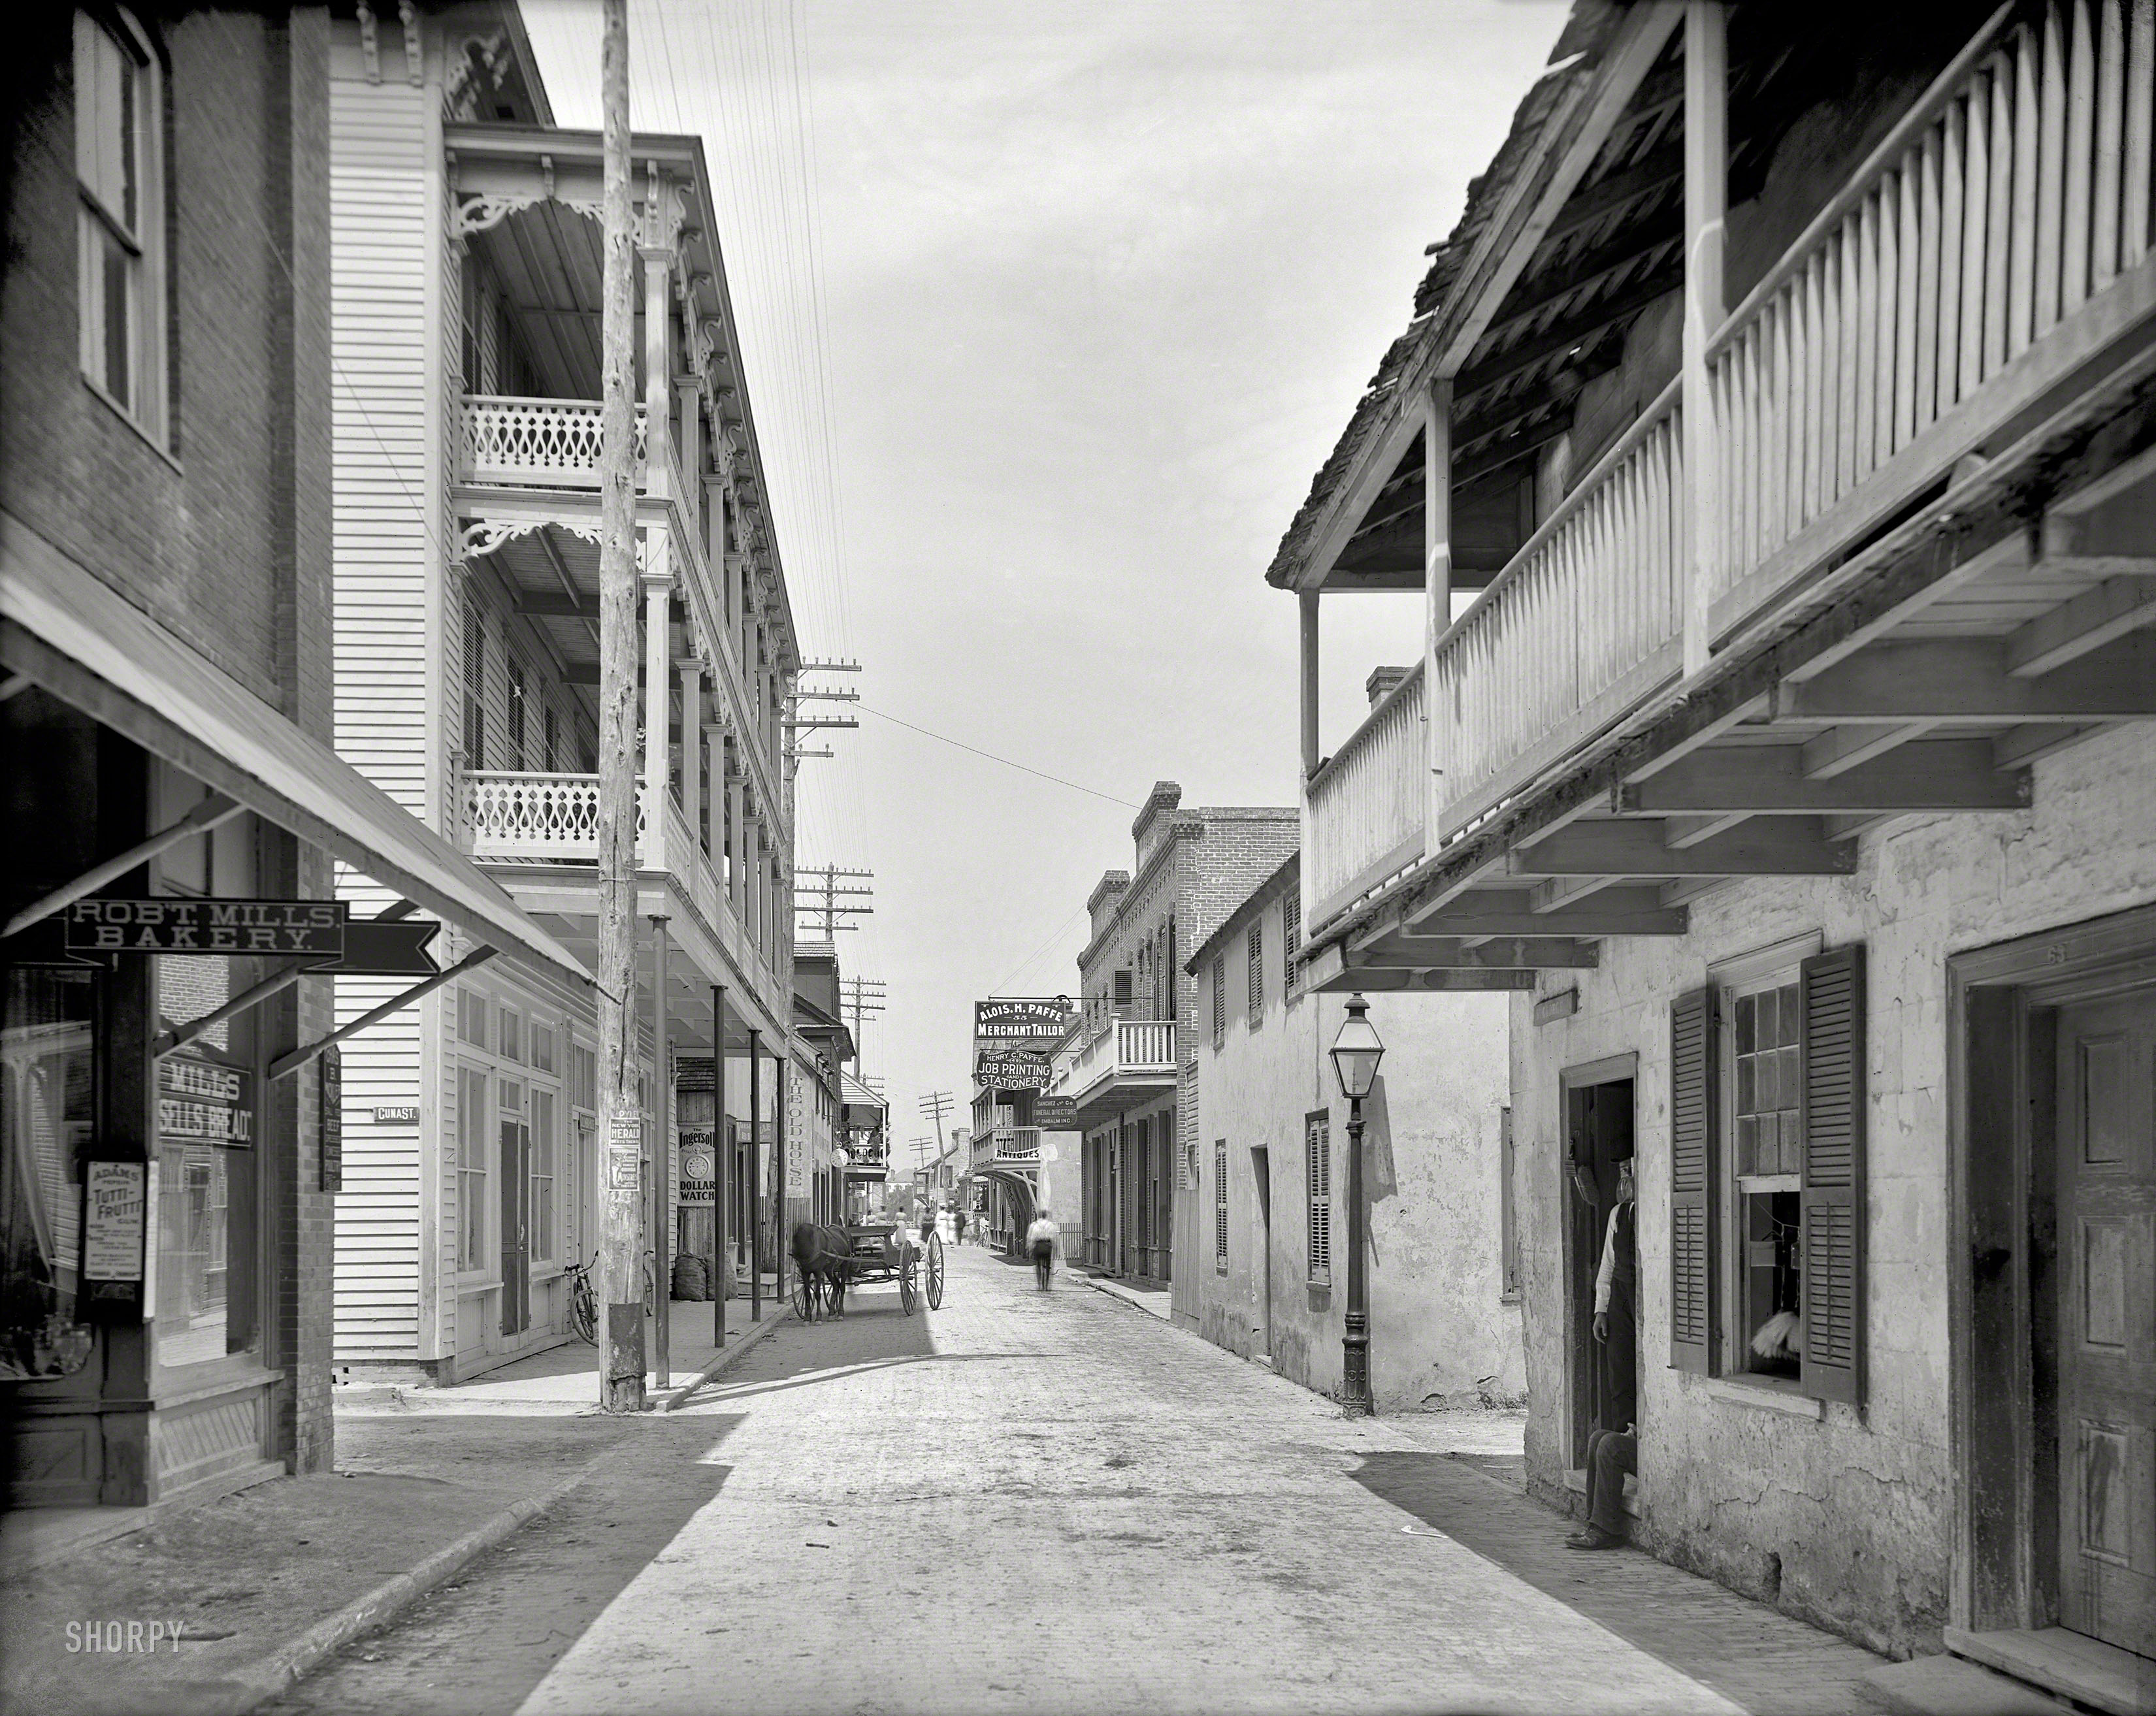 Florida circa 1910. "St. George Street, St. Augustine." Where merchants include purveyors of the "Ingersoll Dollar Watch." 8x10 glass negative. View full size.